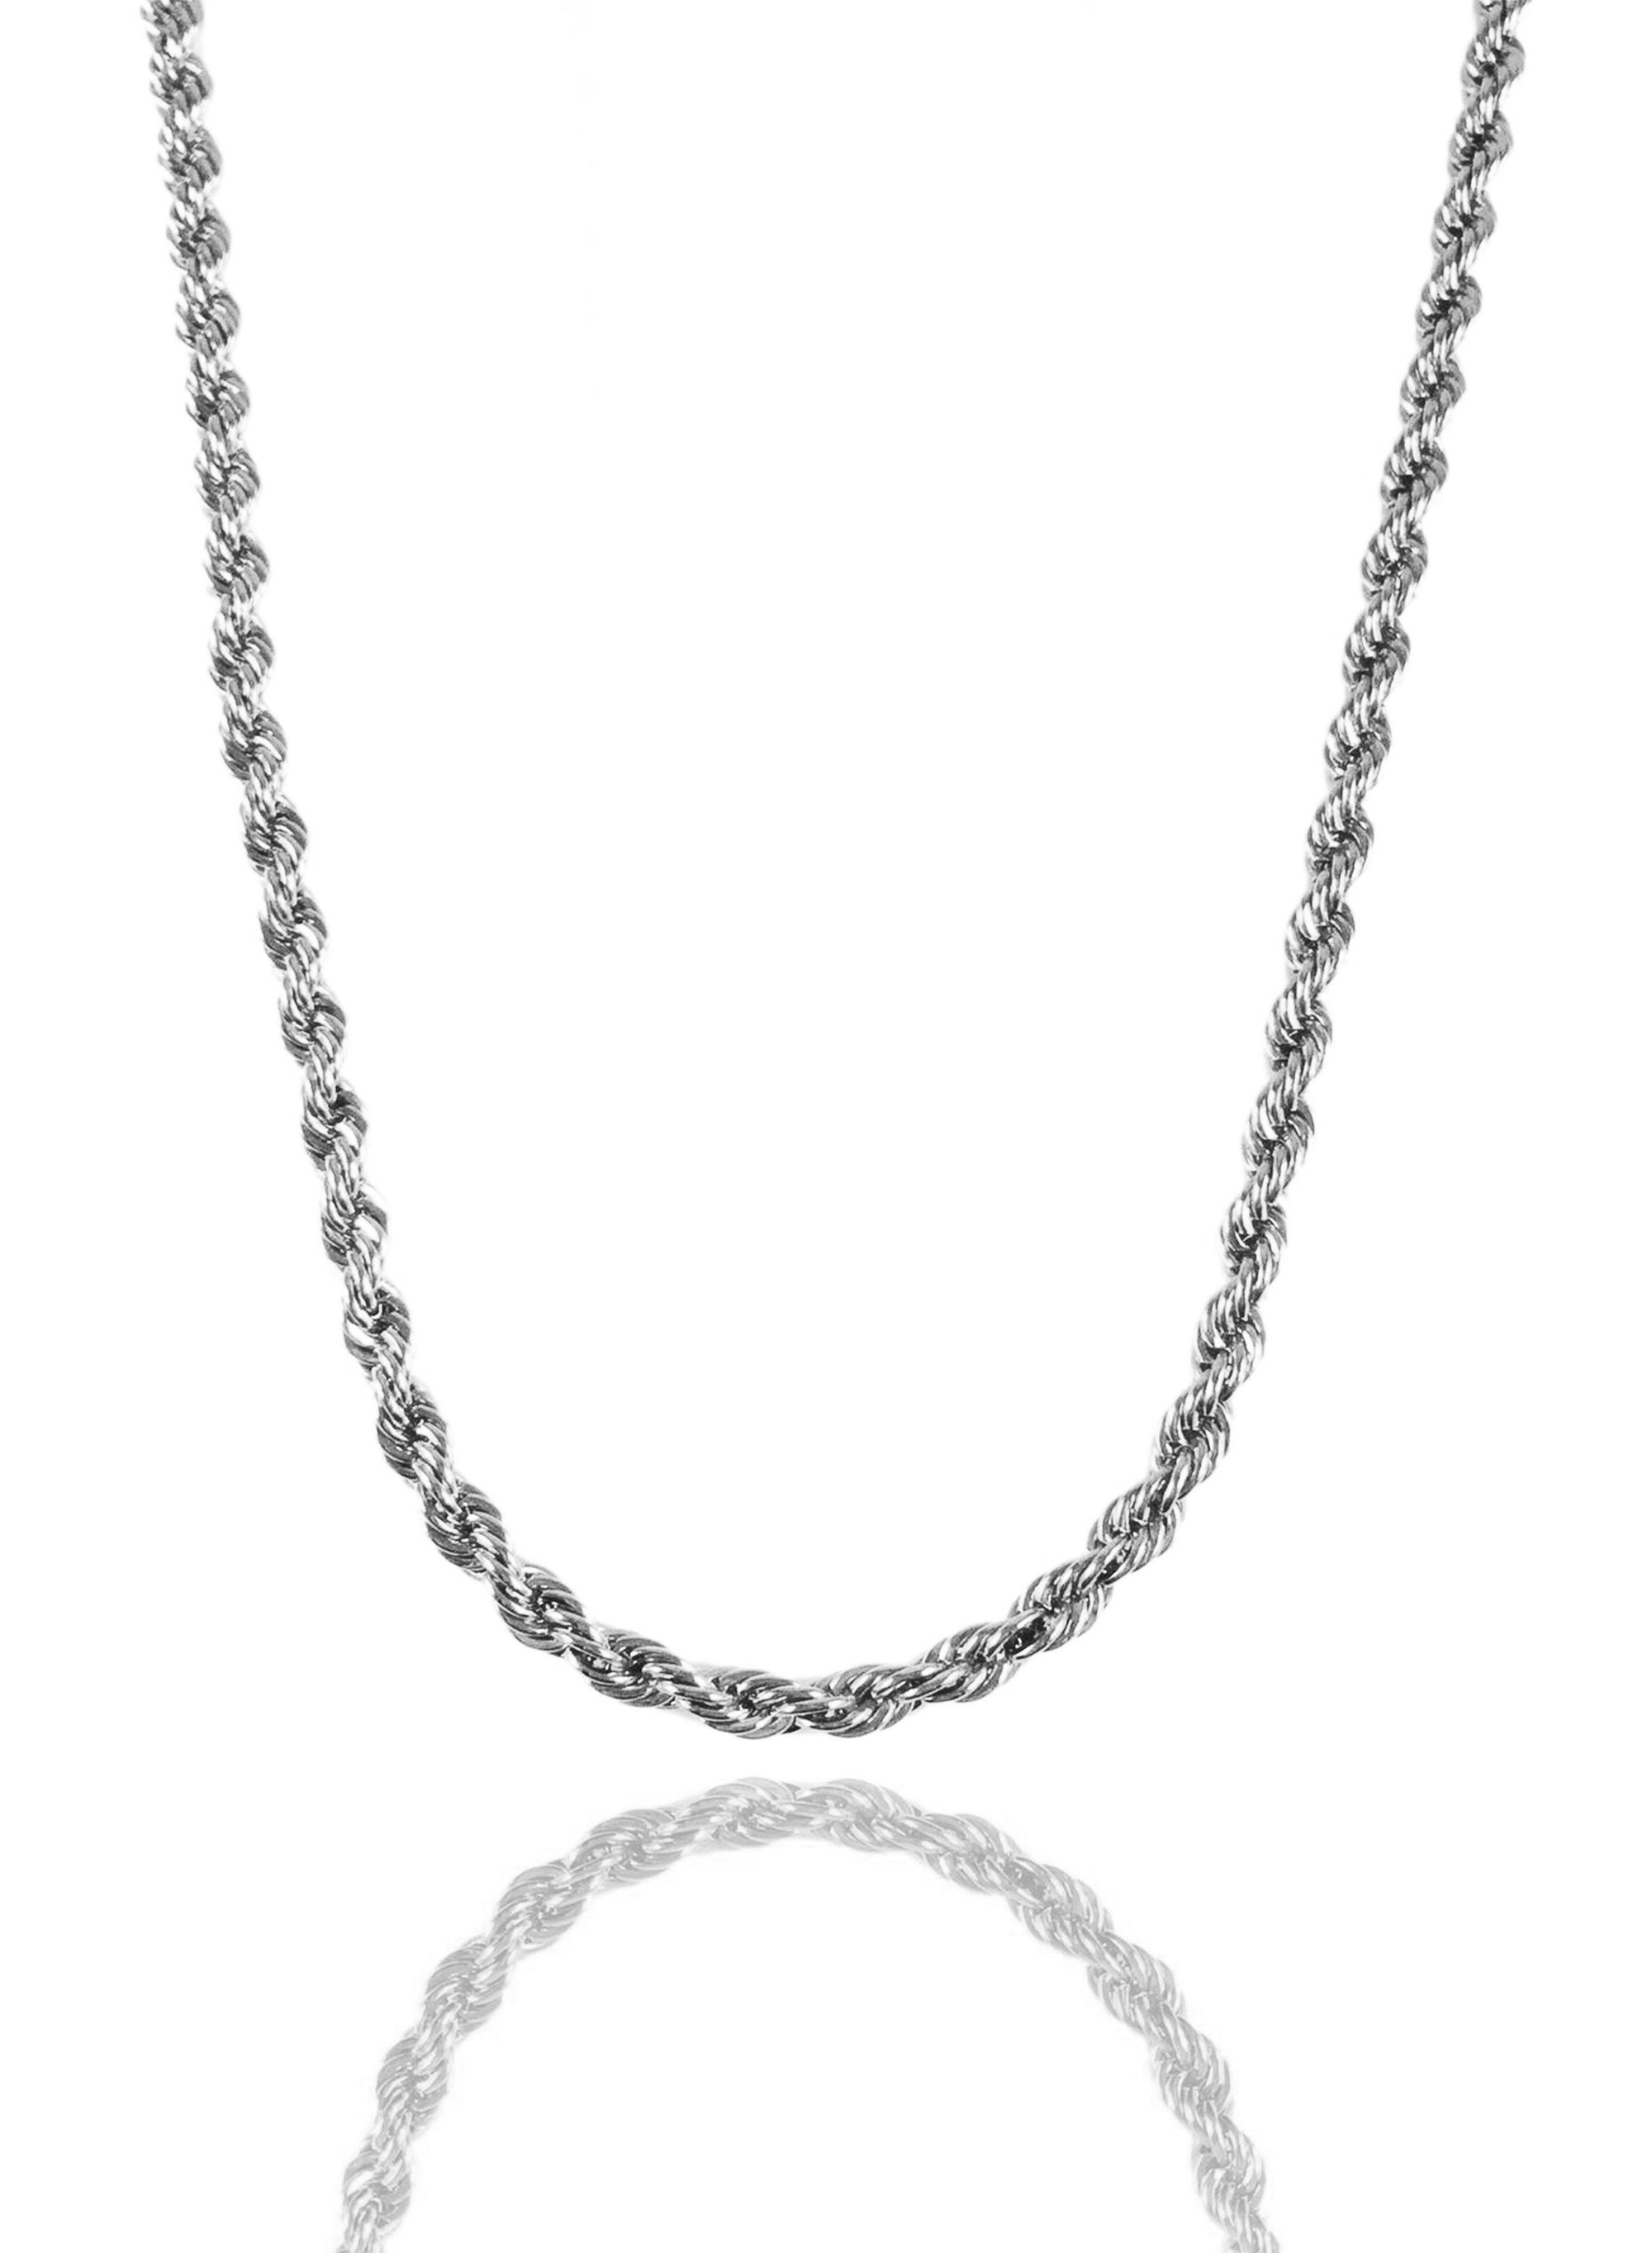 Necklace - The Rope Chain X Stainless